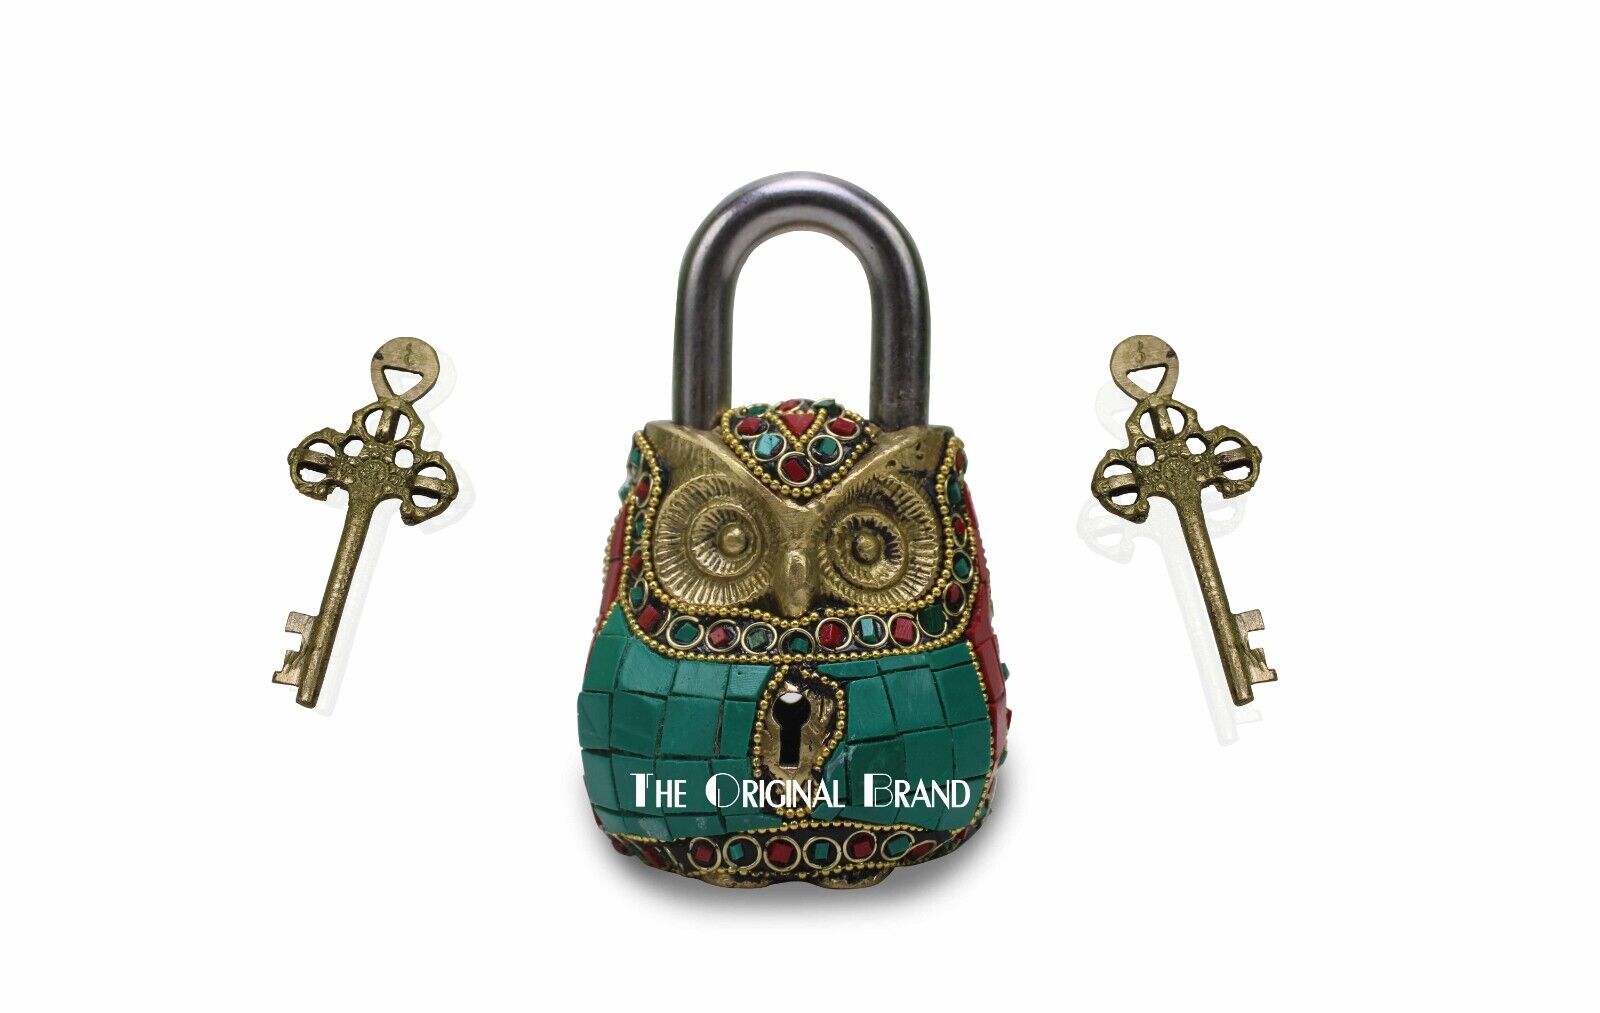 Owl Shaped Brass Lock Antique Handcrafted Locks for Security 